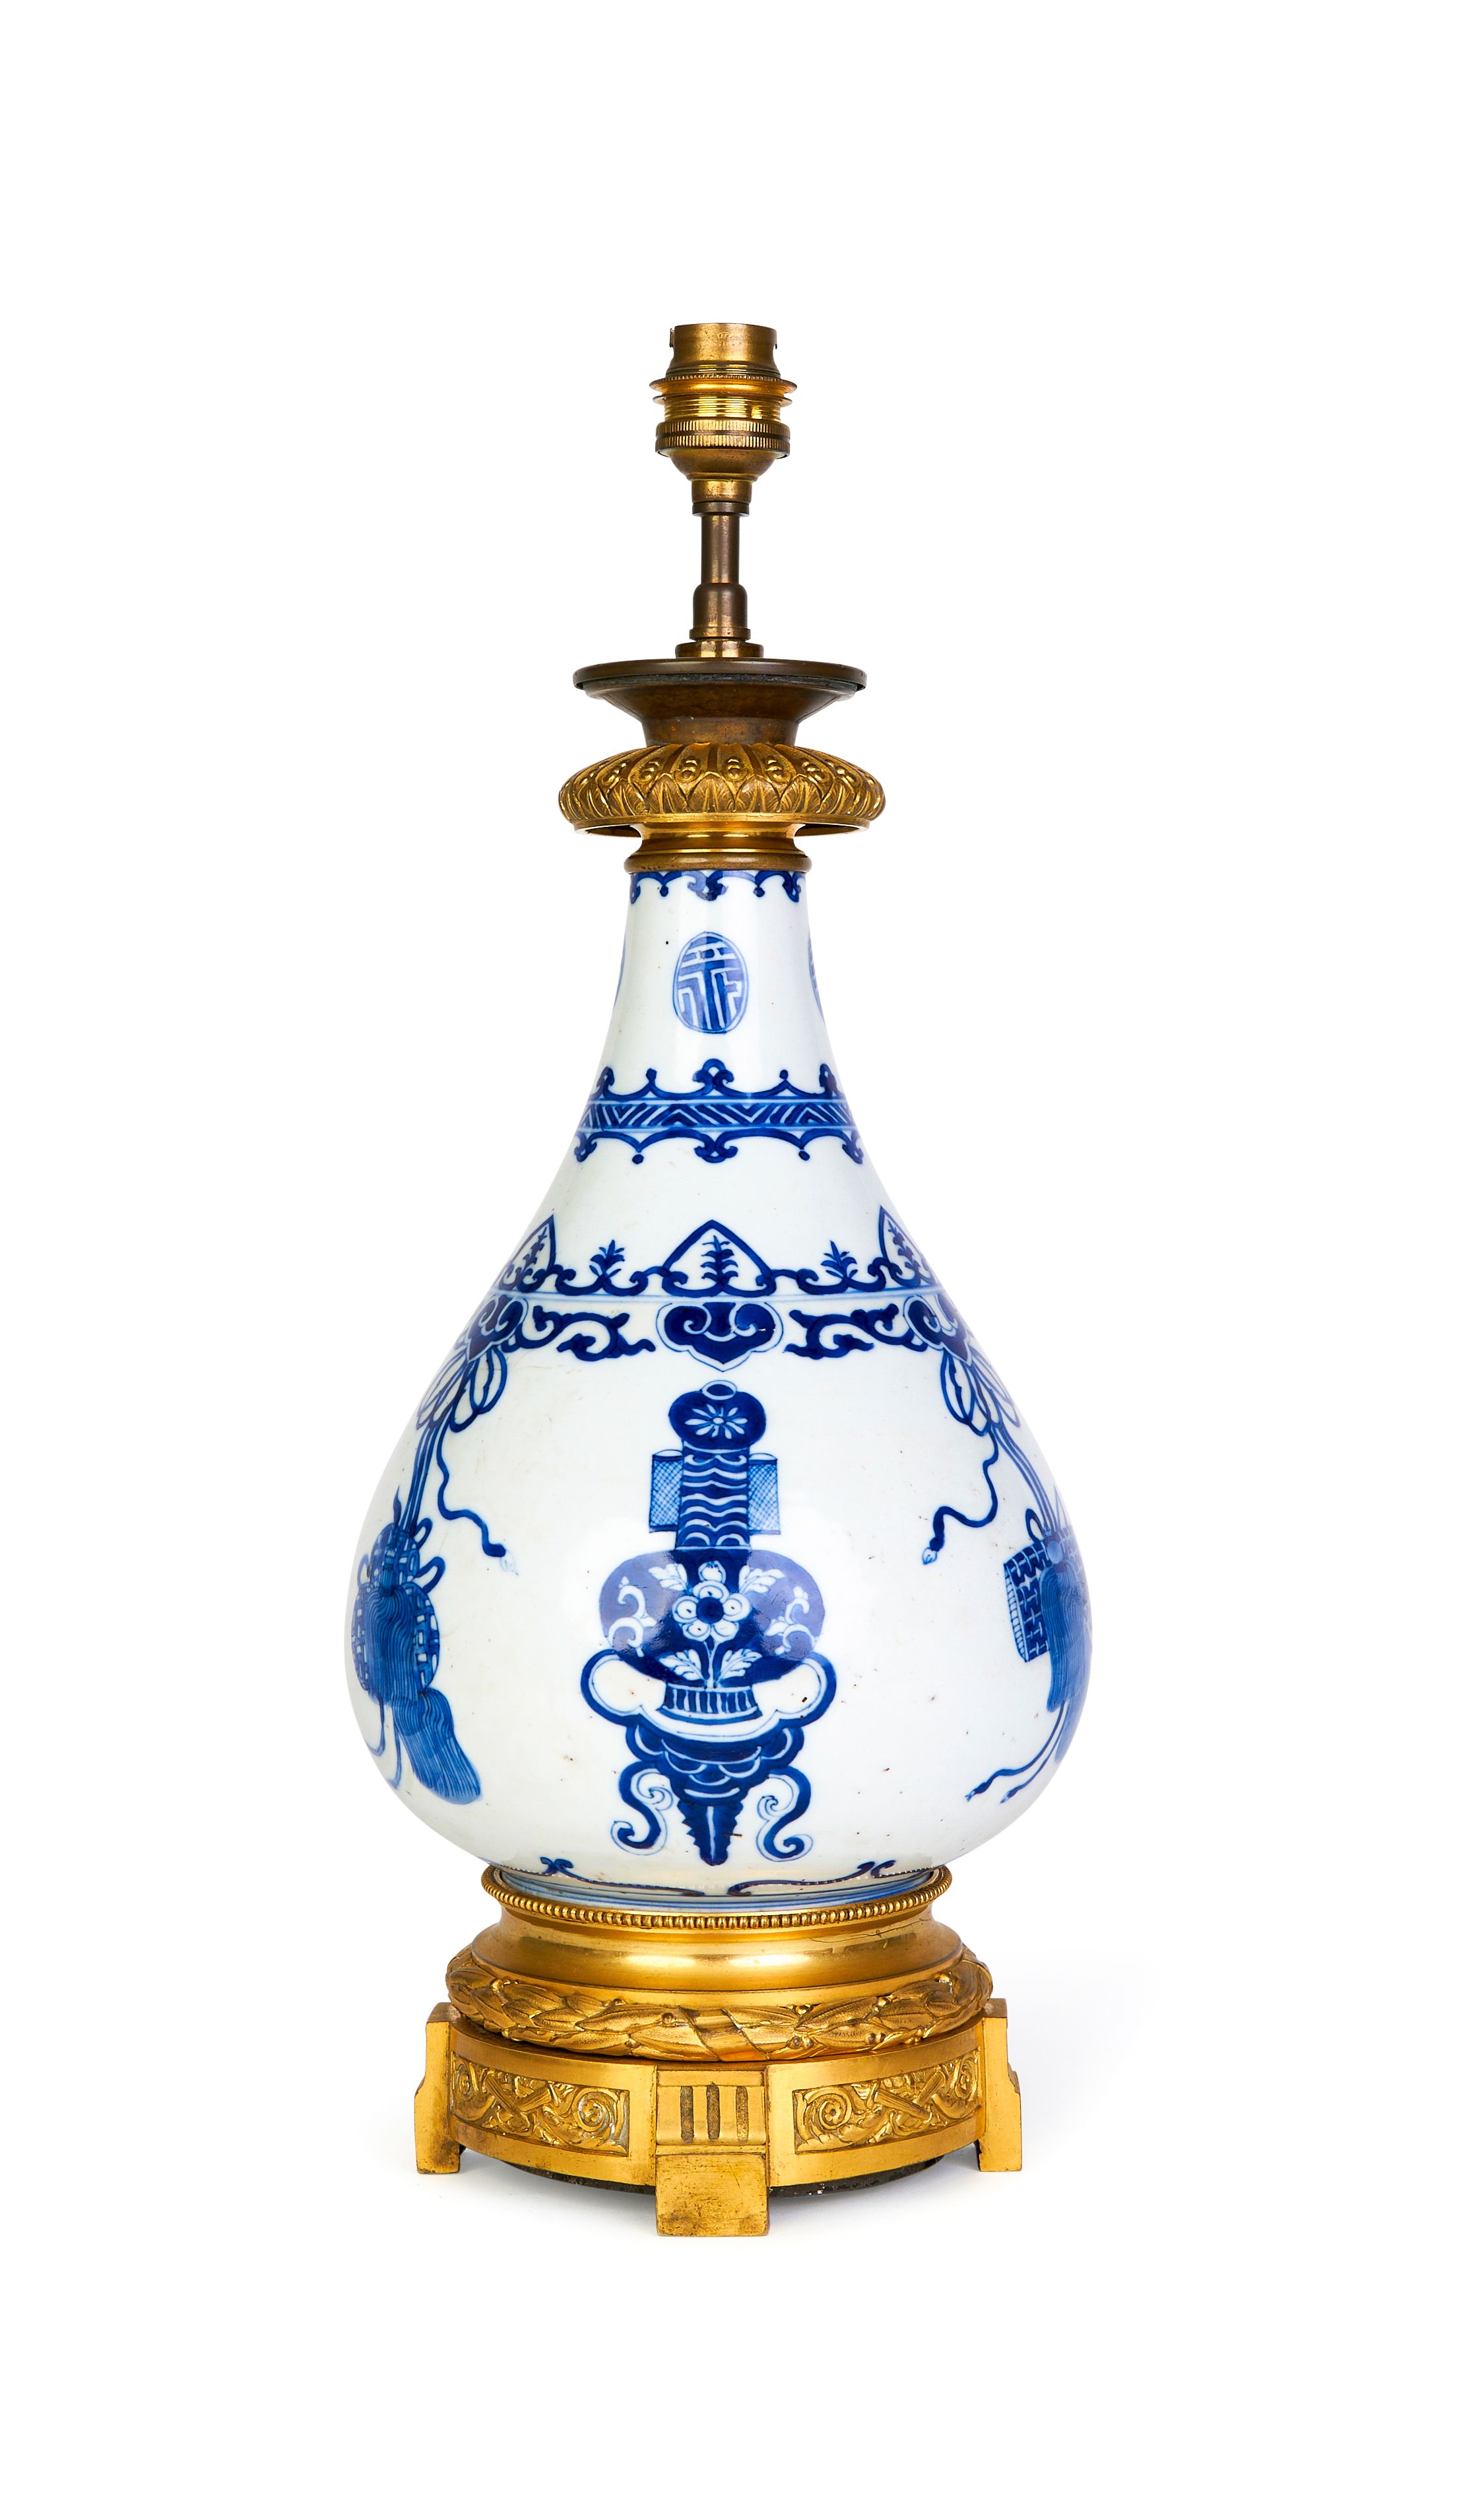 A CHINESE BLUE & WHITE VASE MOUNTED AS A LAMP, KANGXI PERIOD (1662-1722)